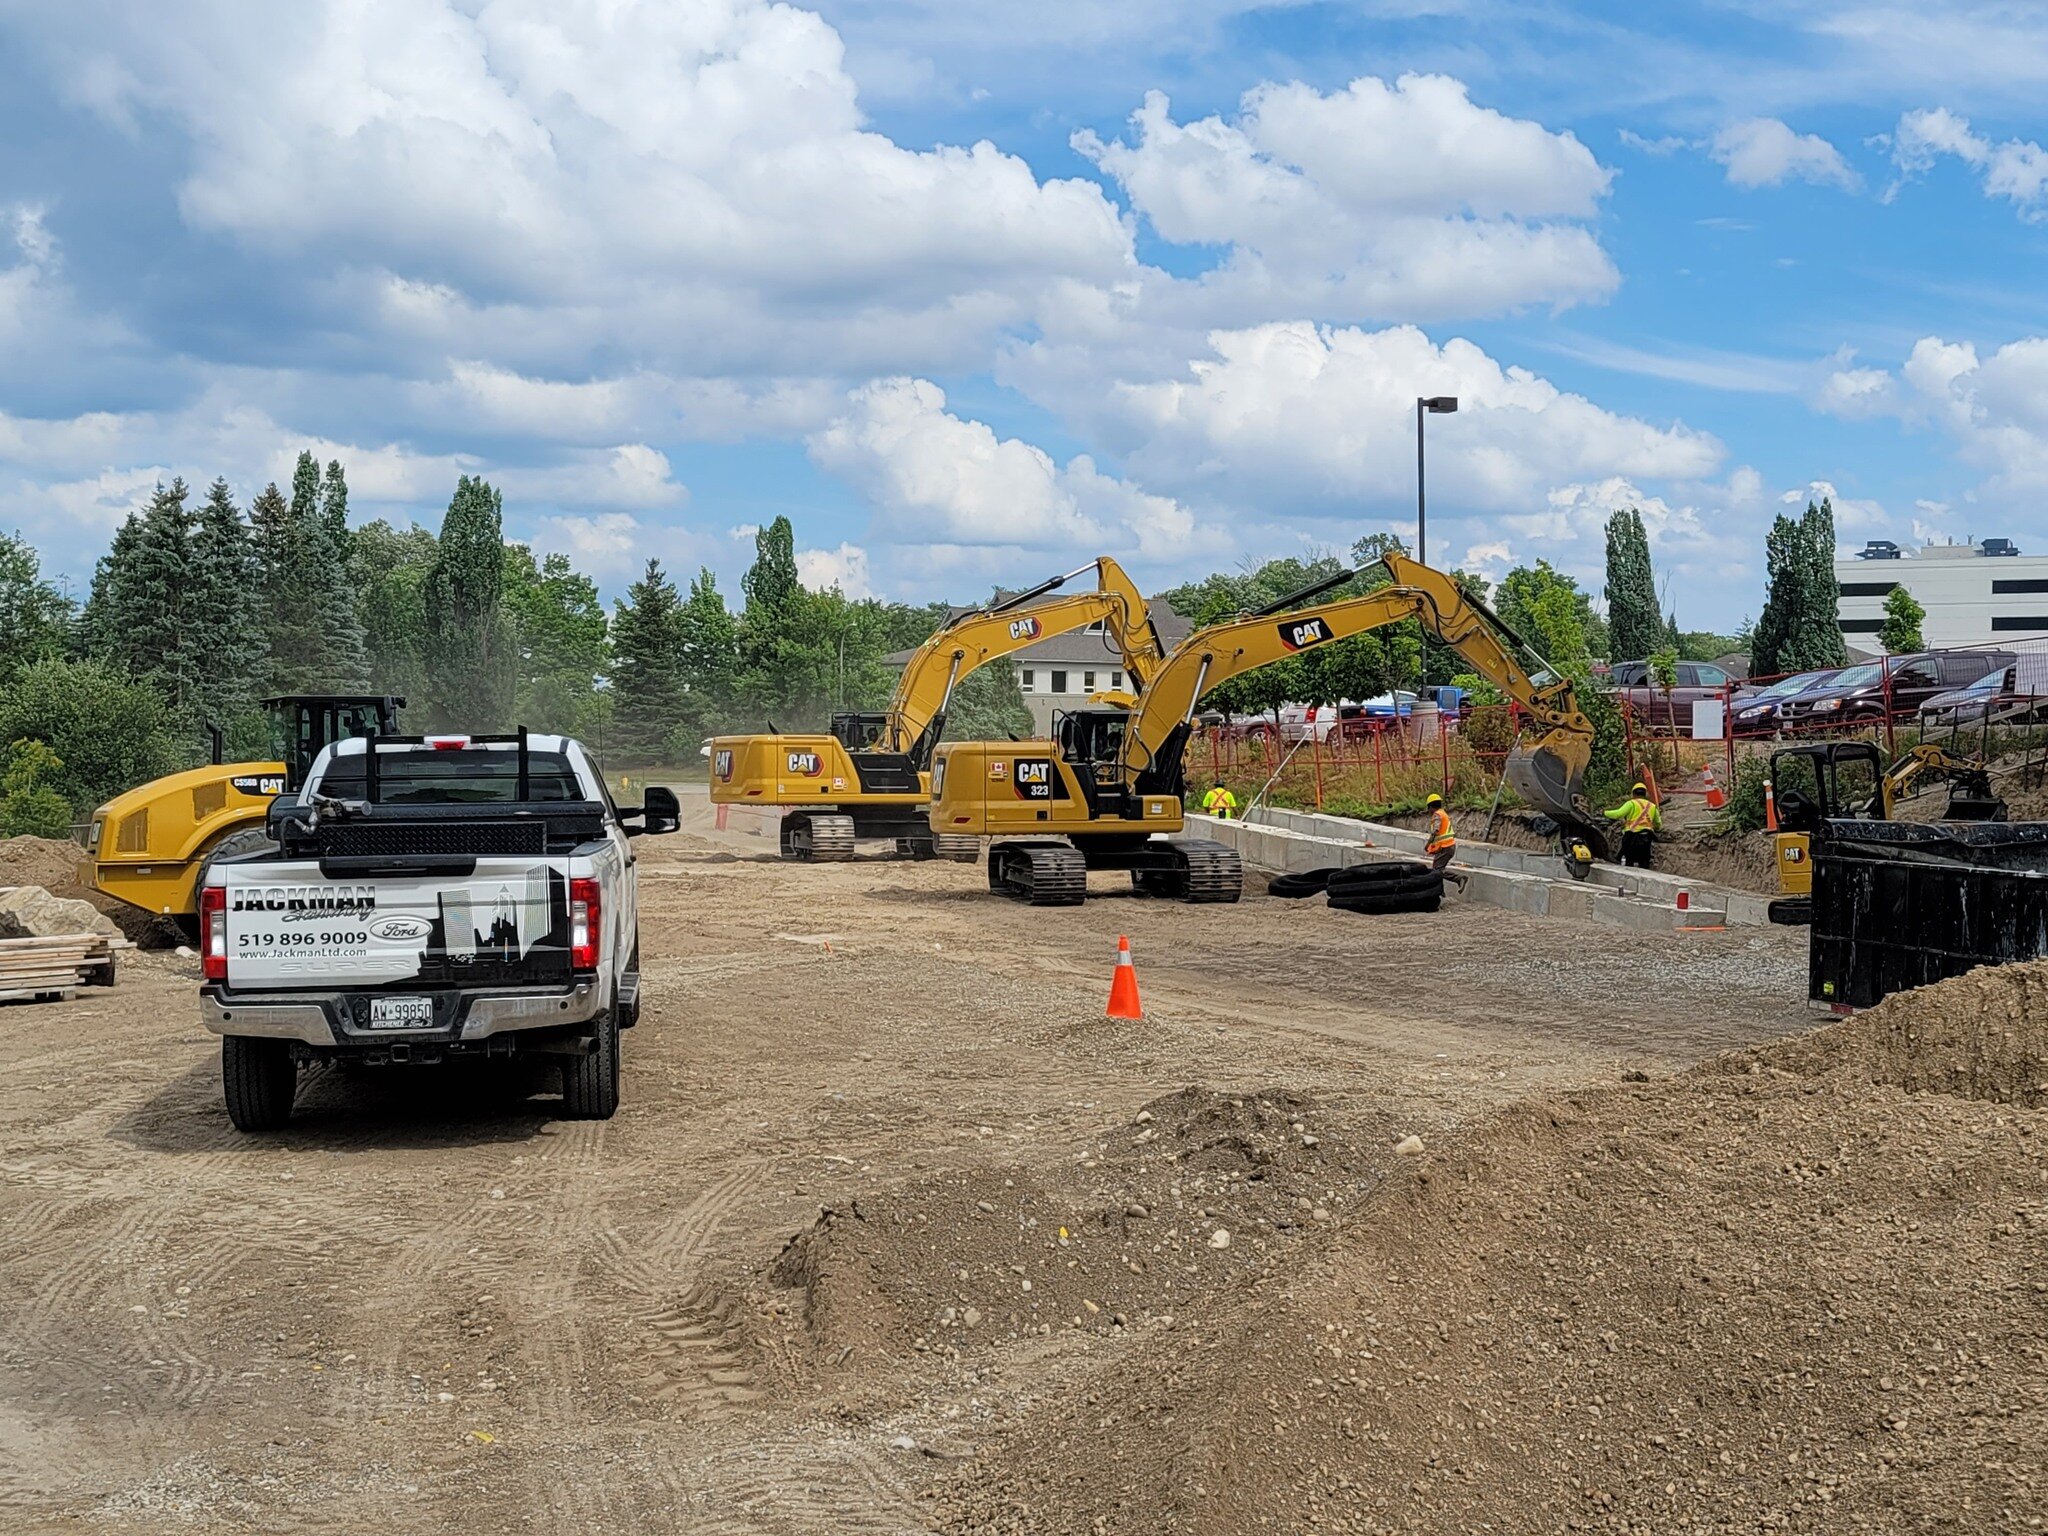 You see the finished project, you even see the progress photos but did you know the first step to any project is Excavating? 
---
Our team is always hard at work prepping sites, digging trenches or filling holes for wonderful projects to start, get b